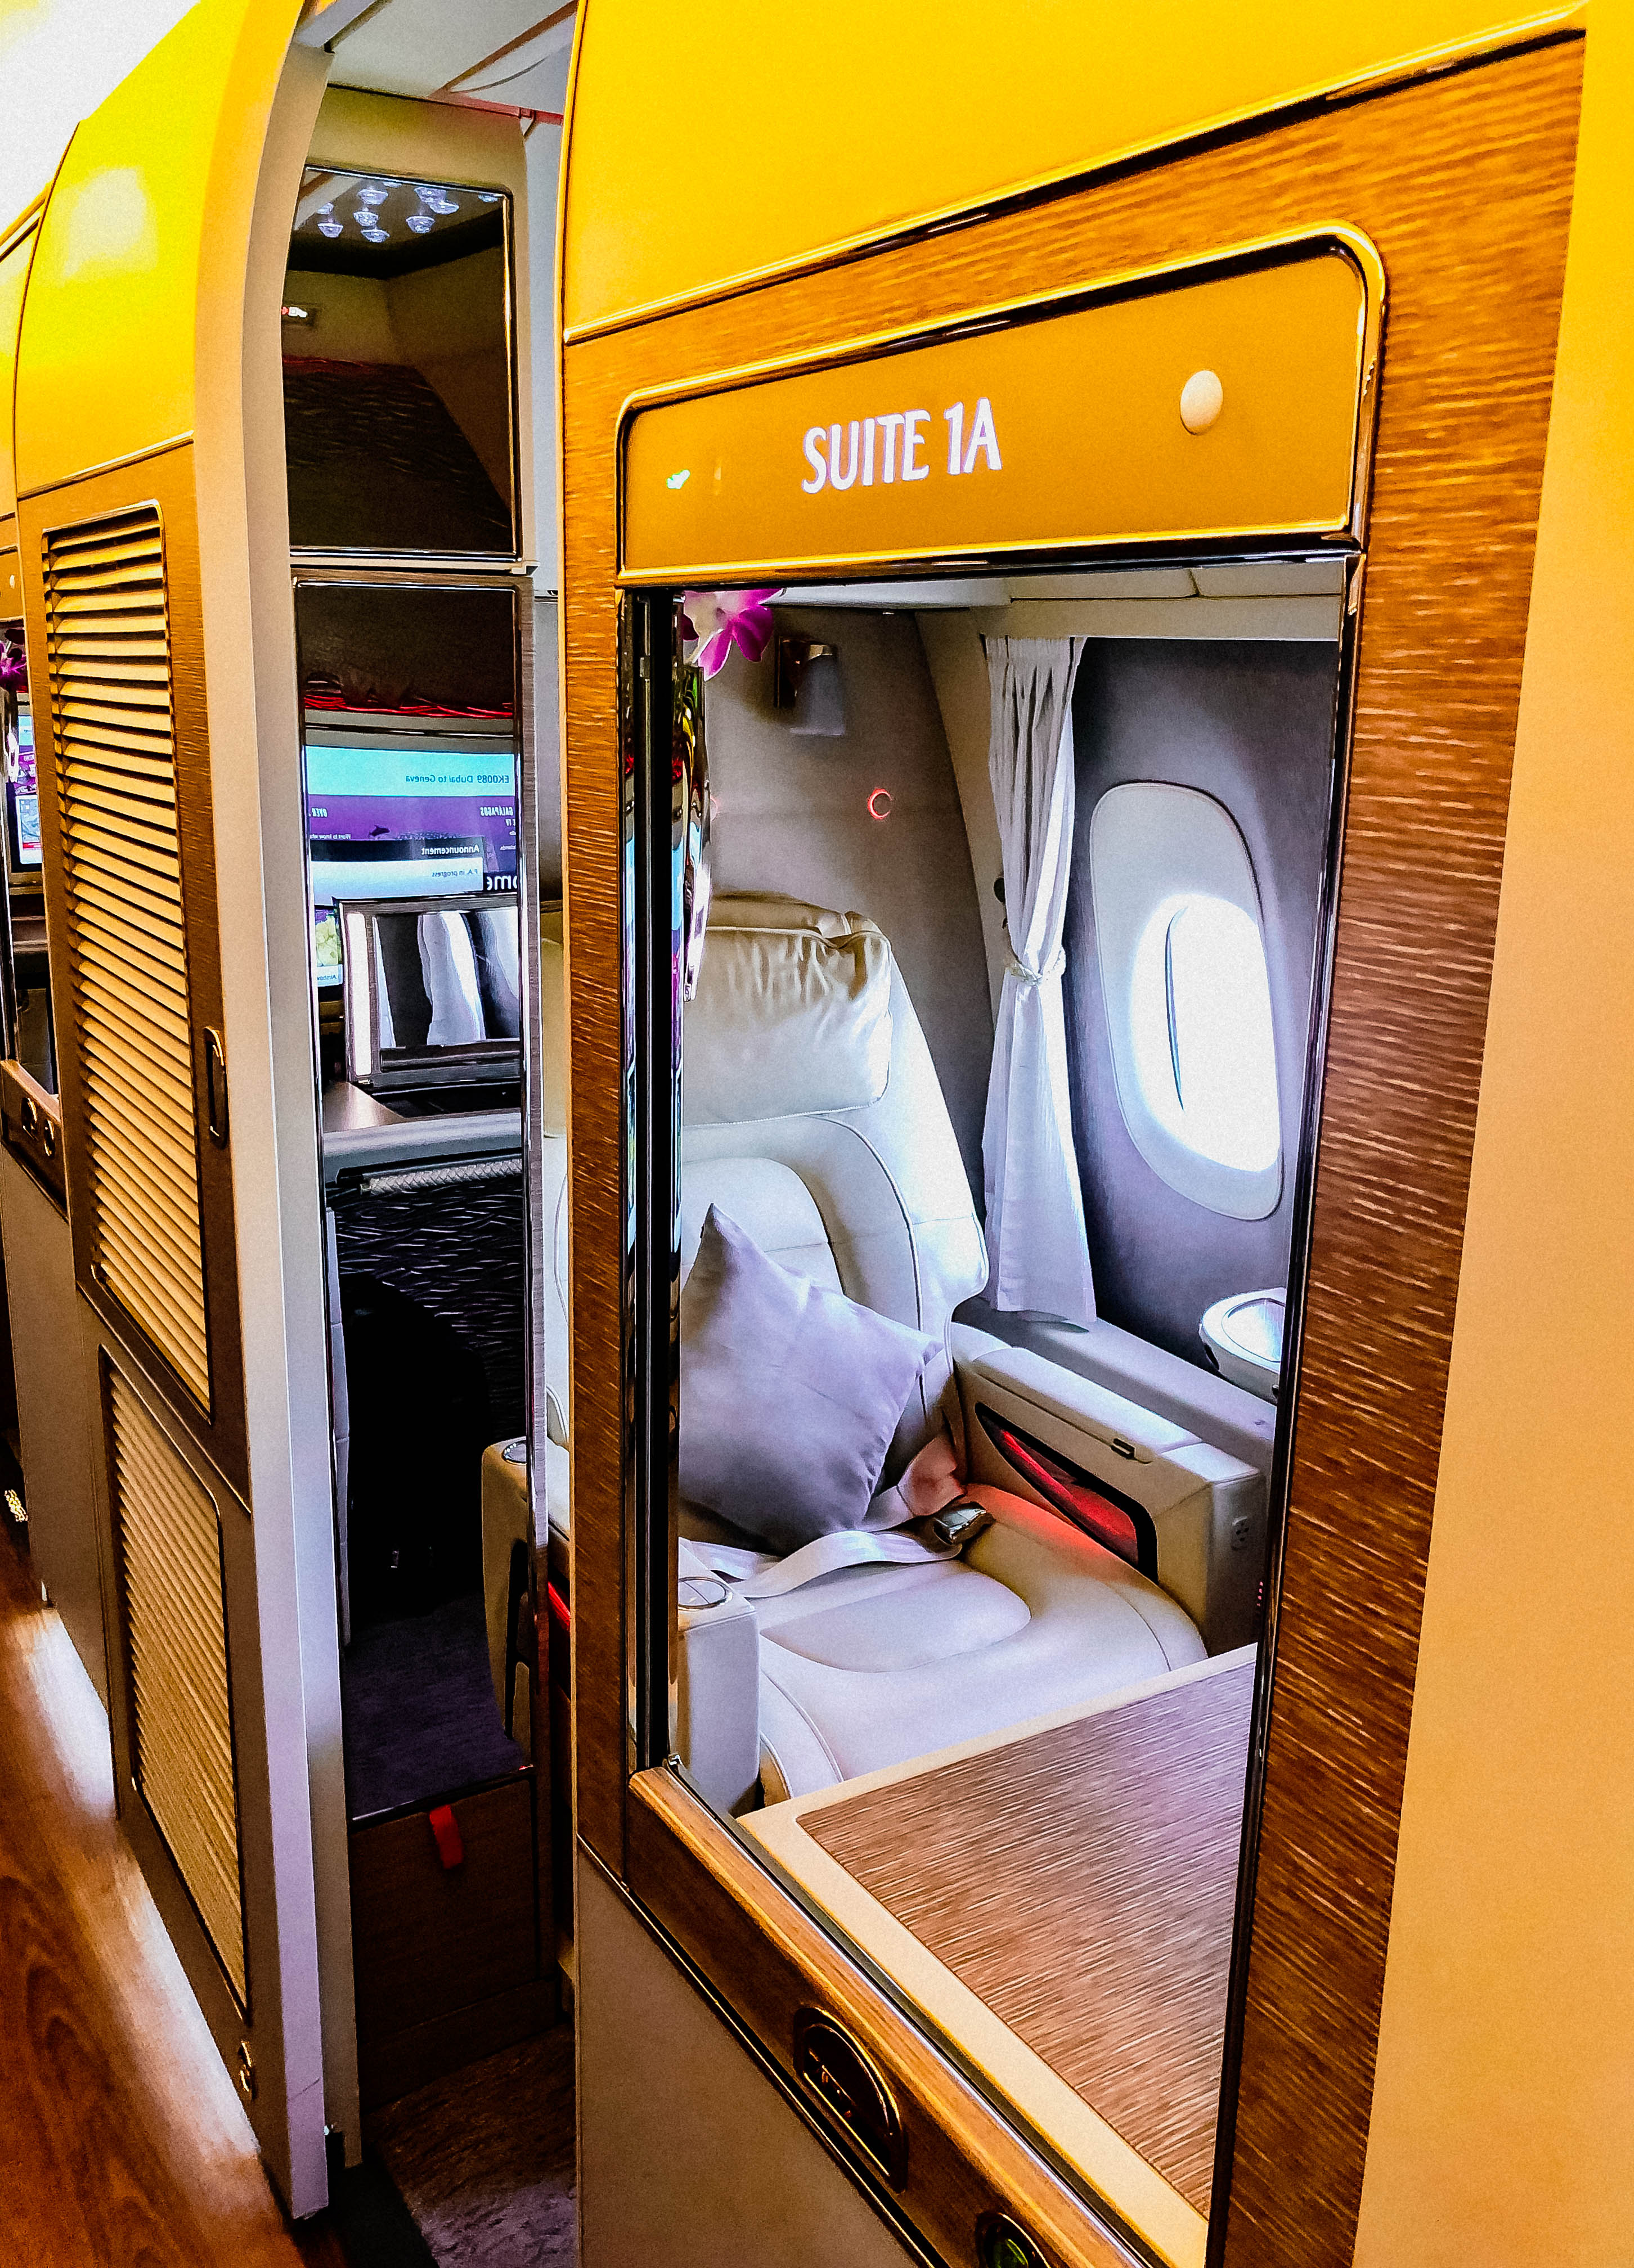 First class airplane amenities you'll totally envy